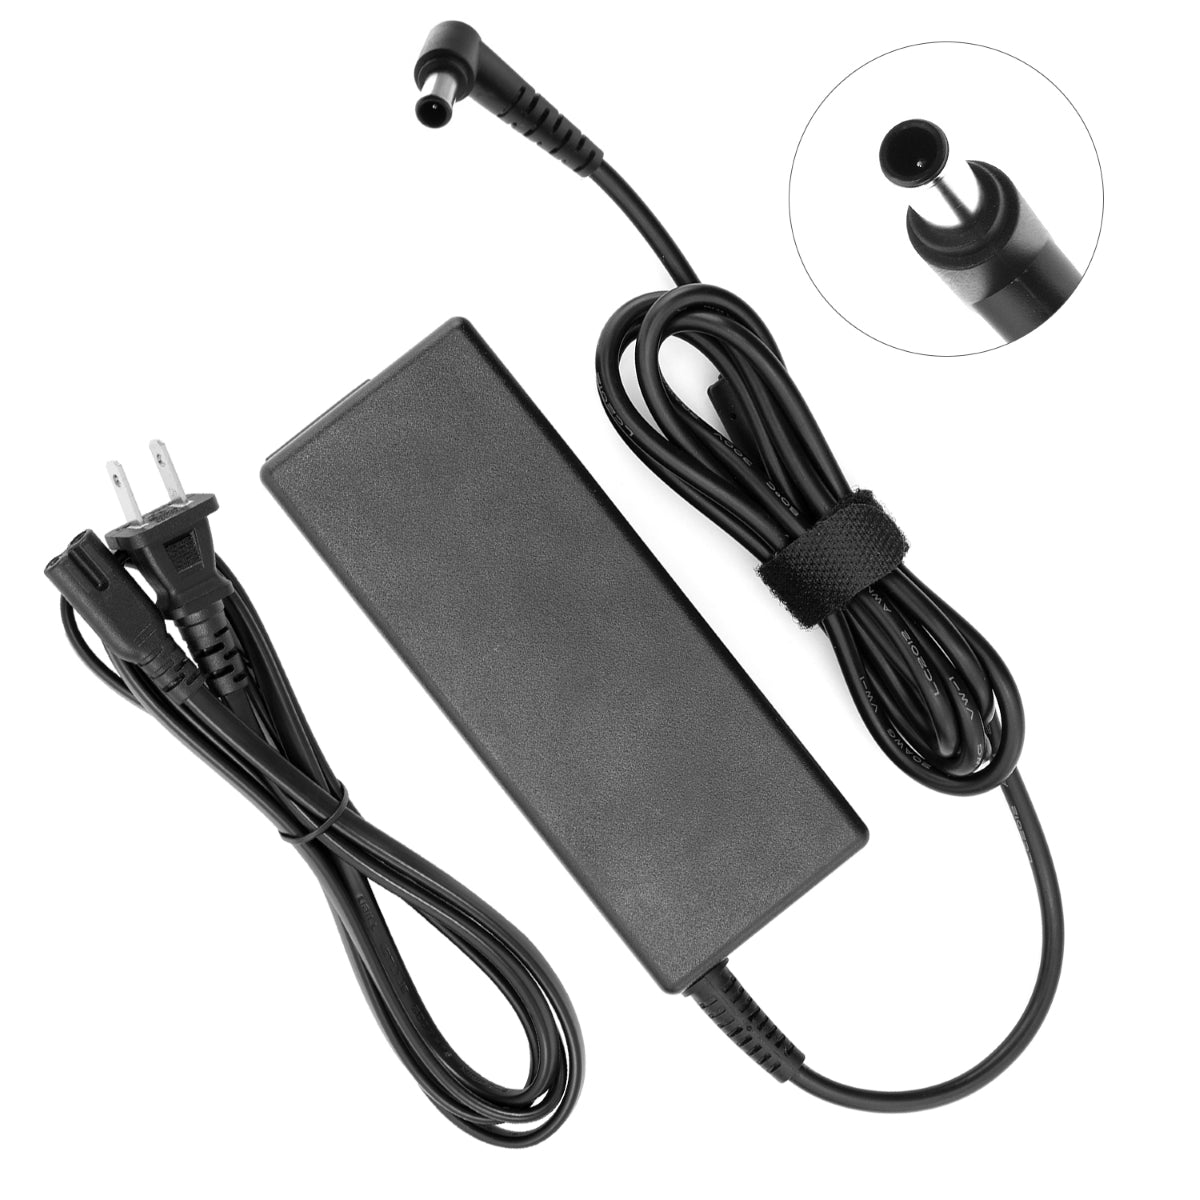 AC Adapter for LG 23EN33S Monitor